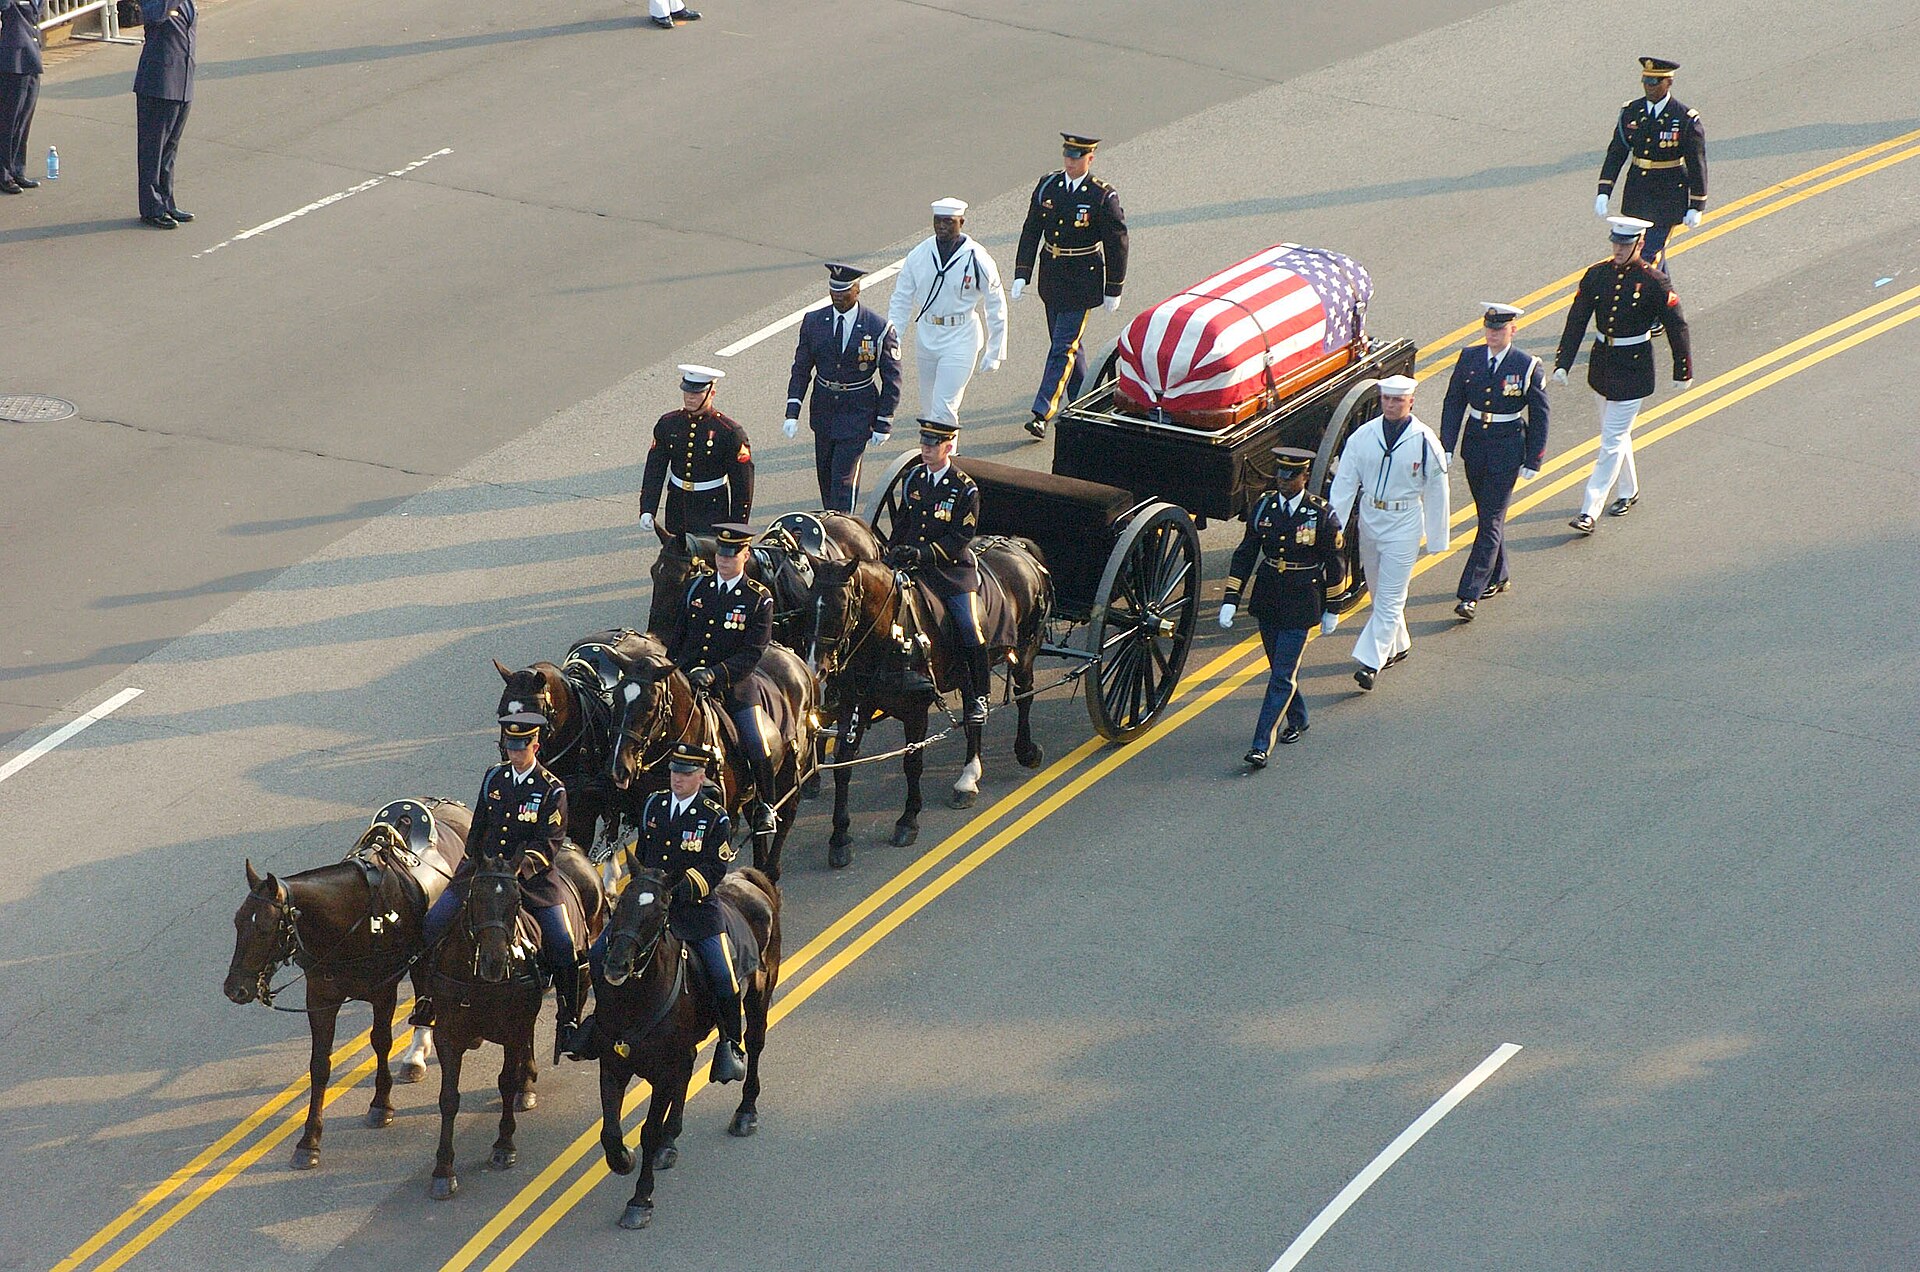 1920px-Ronald_Reagan_casket_on_caisson_during_funeral_procession.jpg